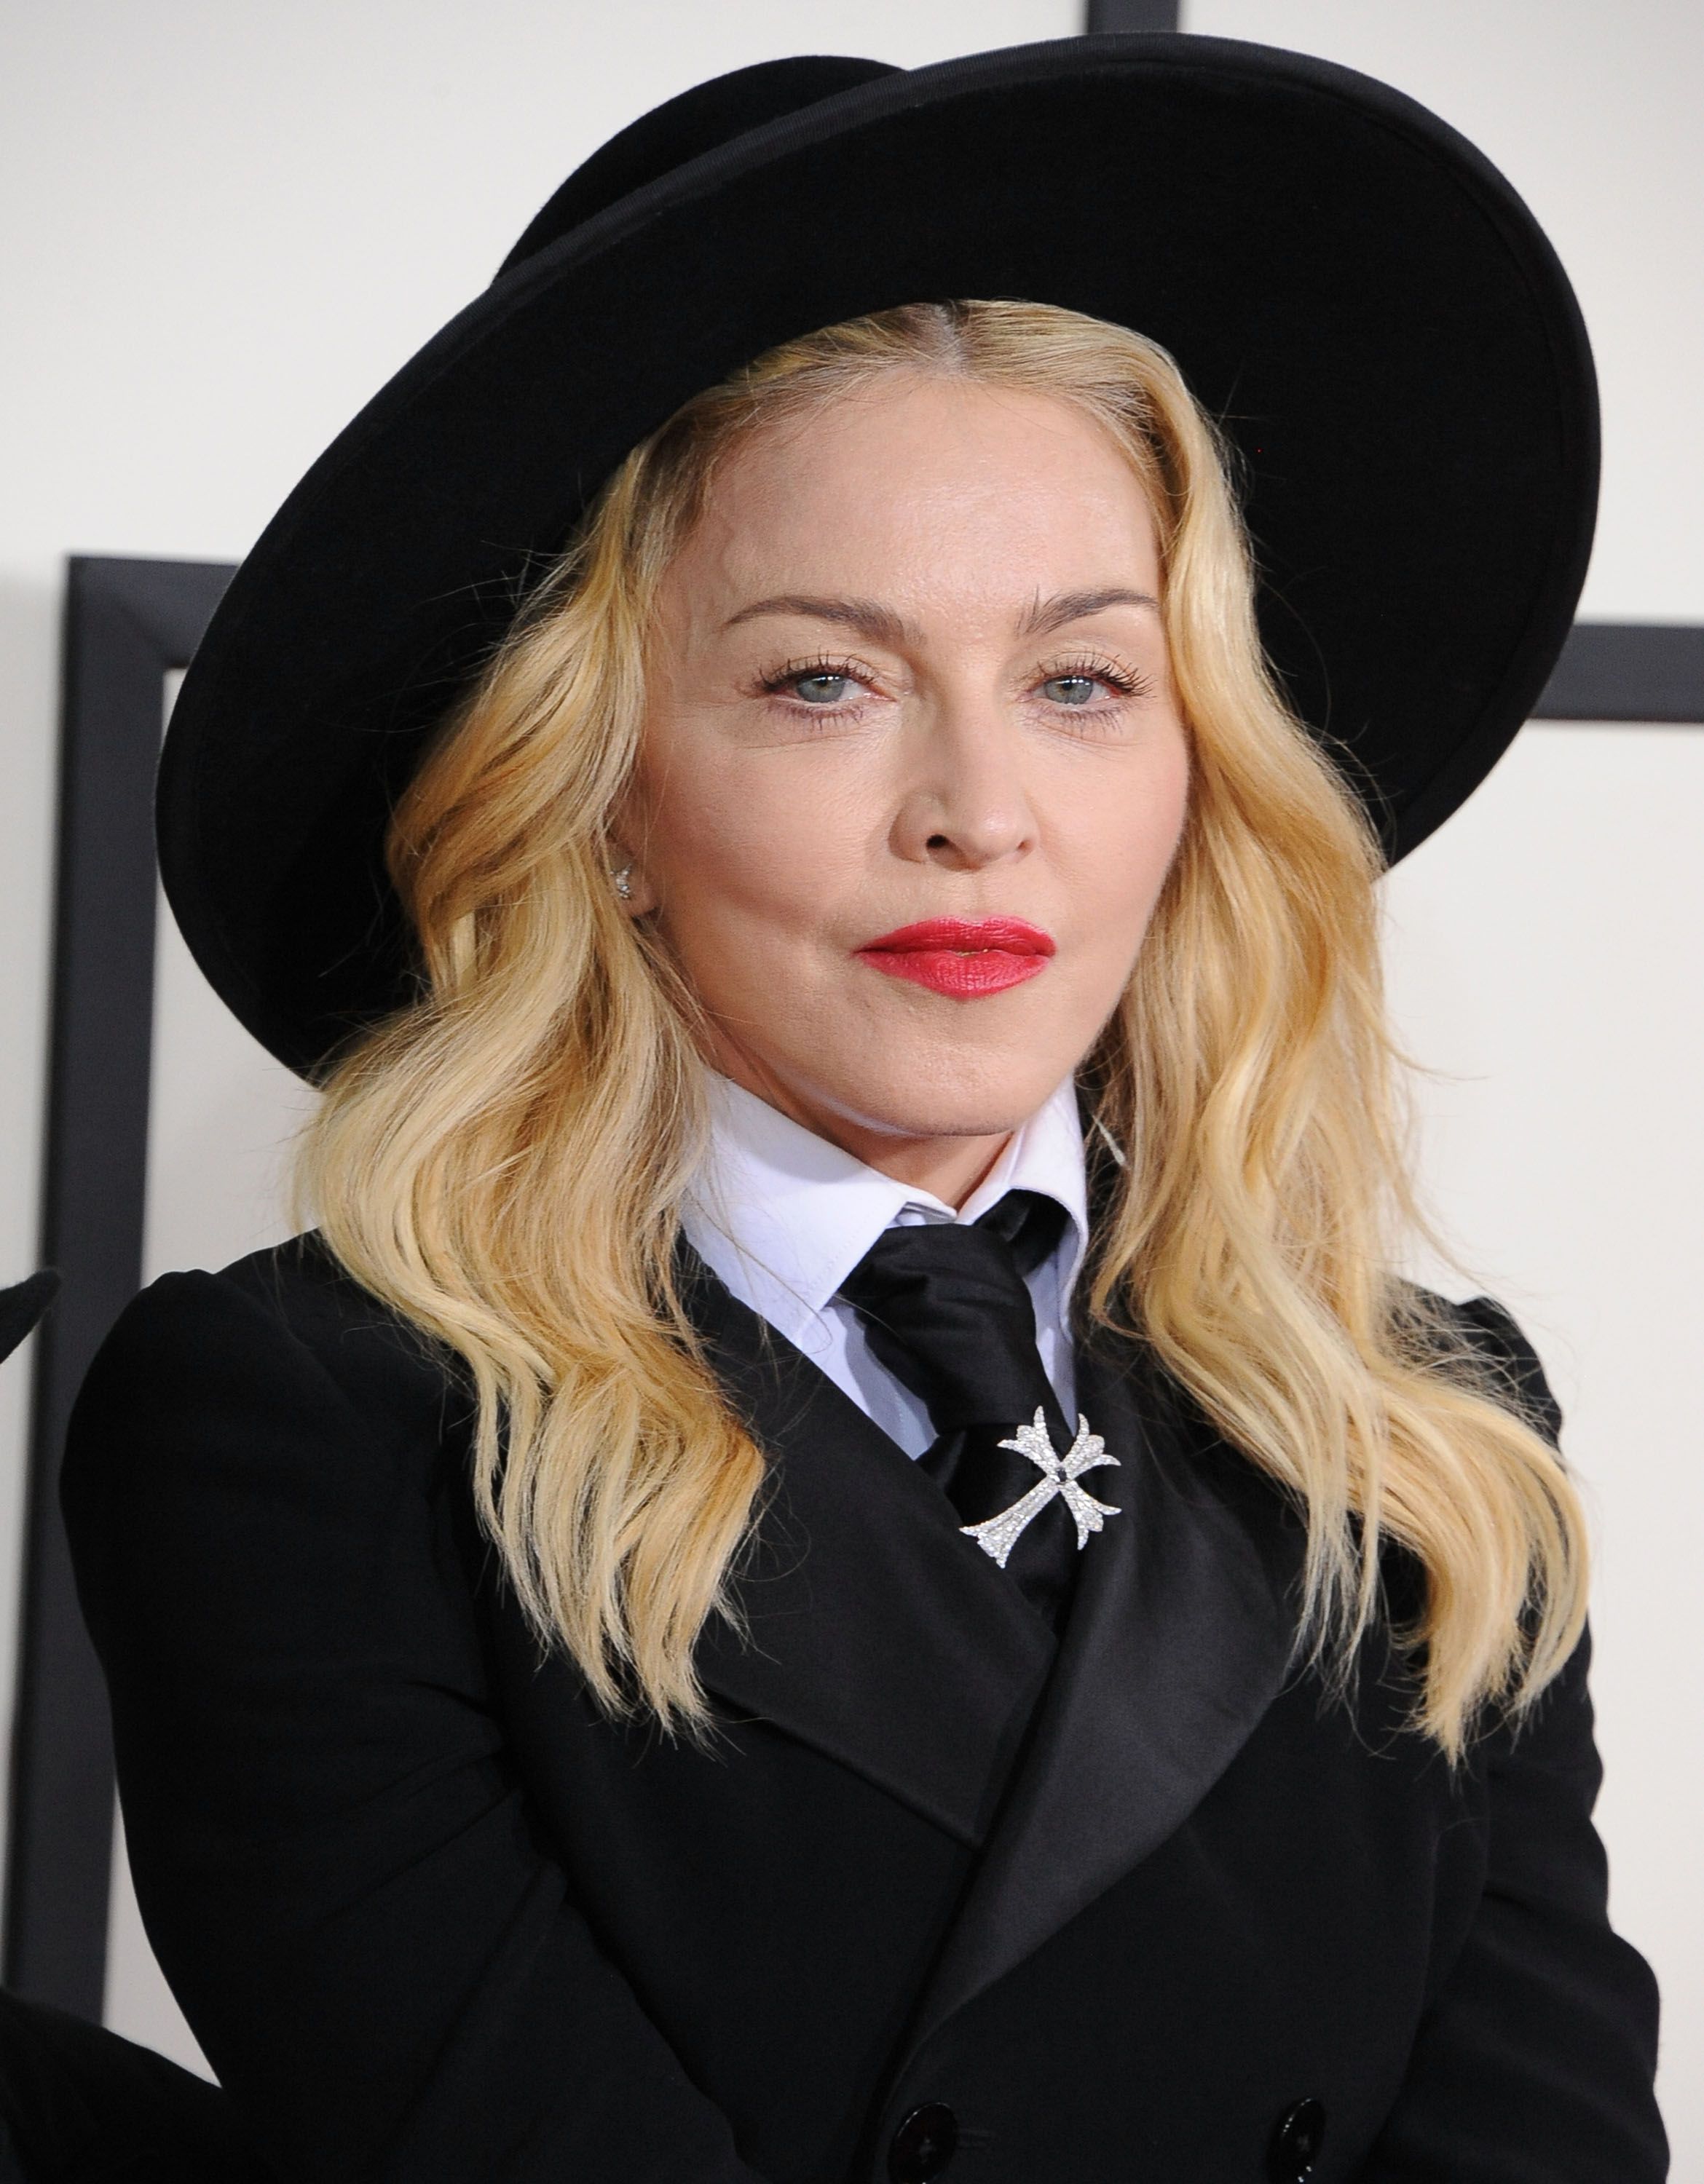 Madonna at the 56th GRAMMY Awards on January 26, 2014  | Photo: Getty Images